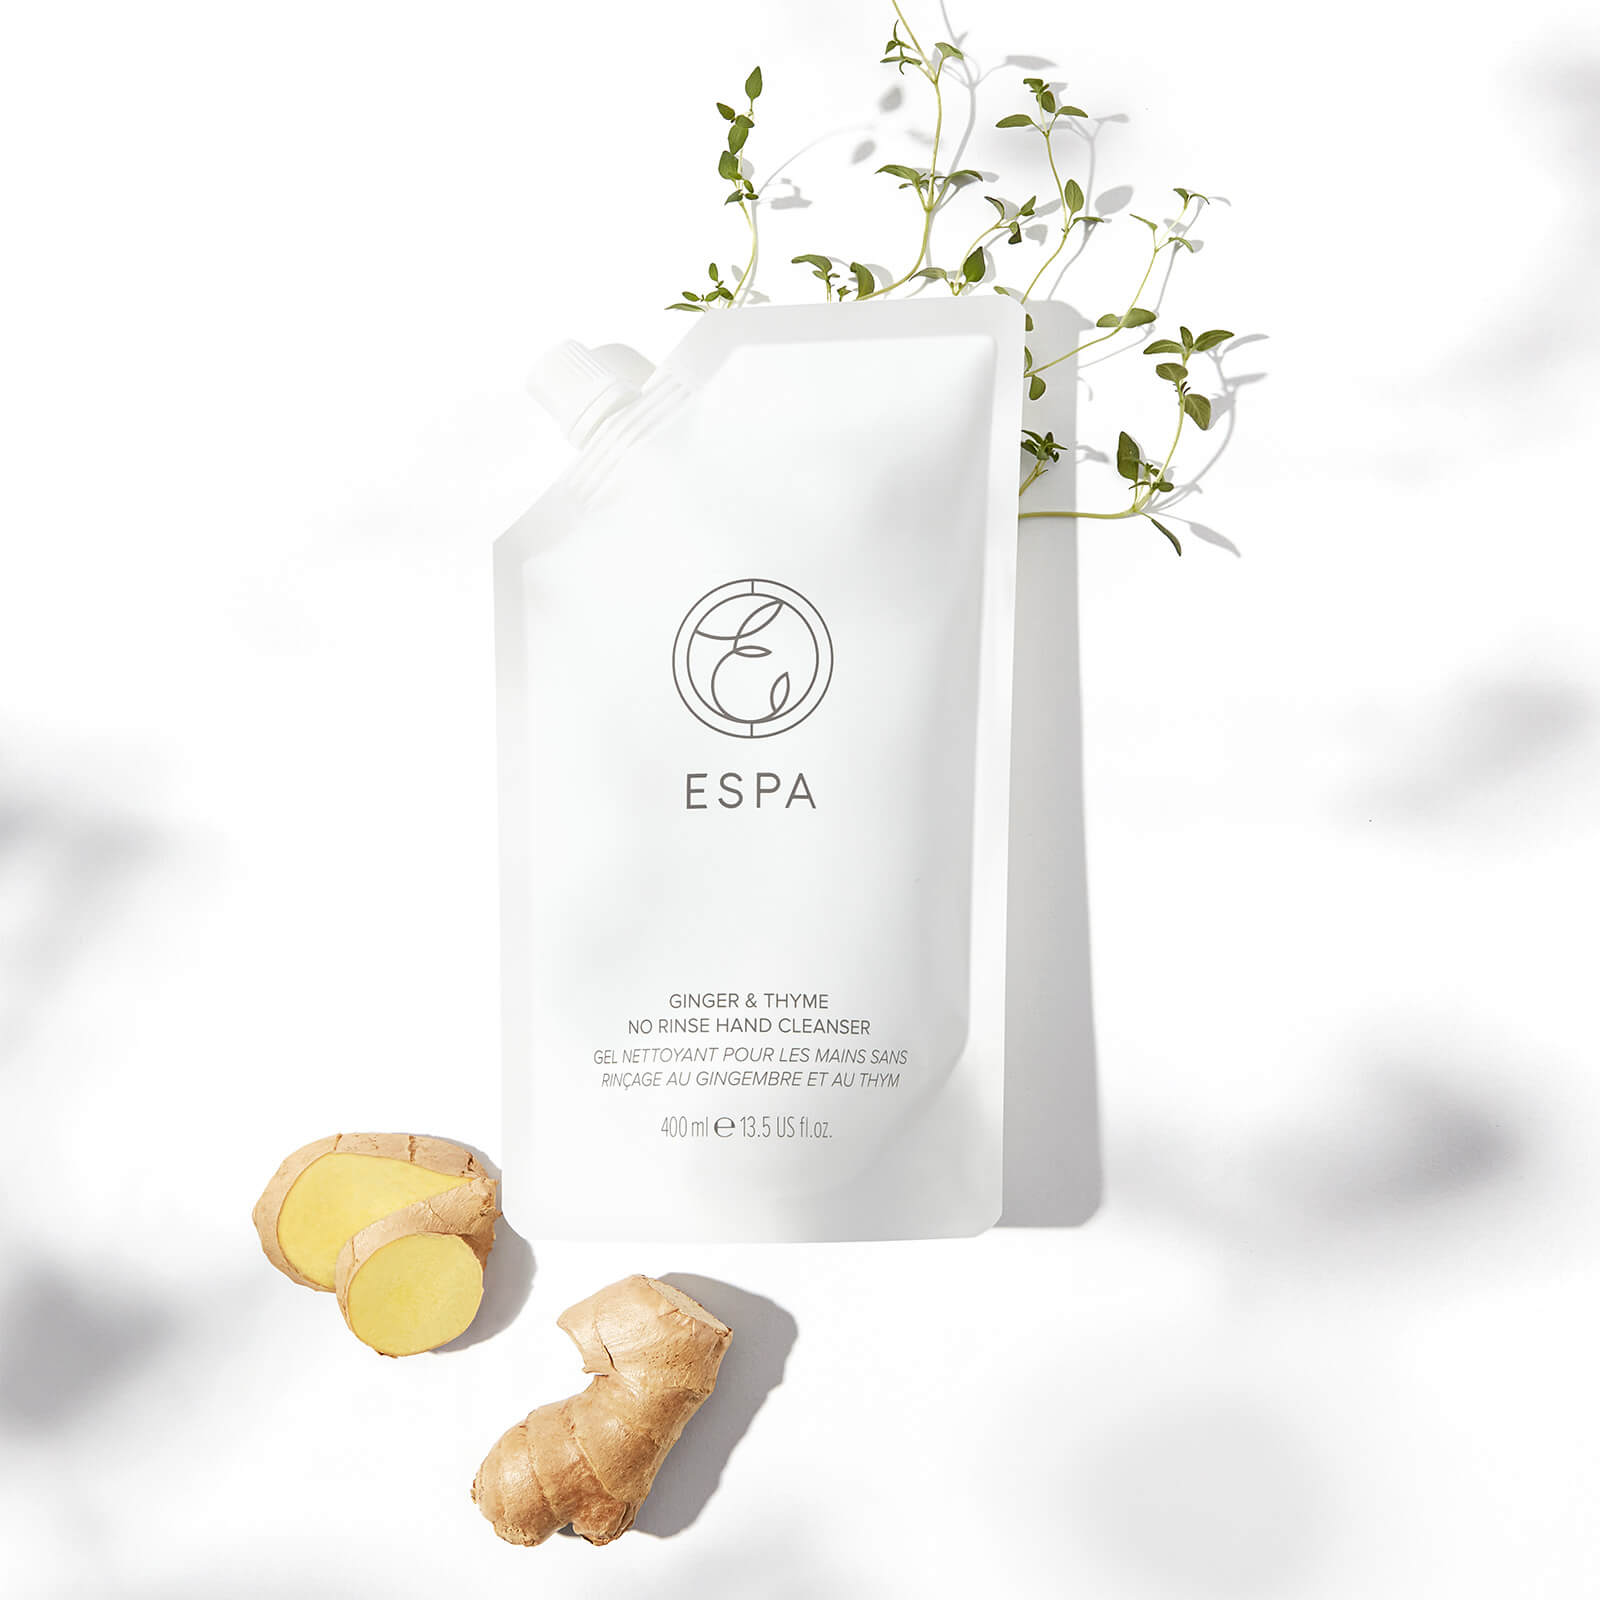 Shop Espa Ginger & Thyme No Rinse Hand Cleanser